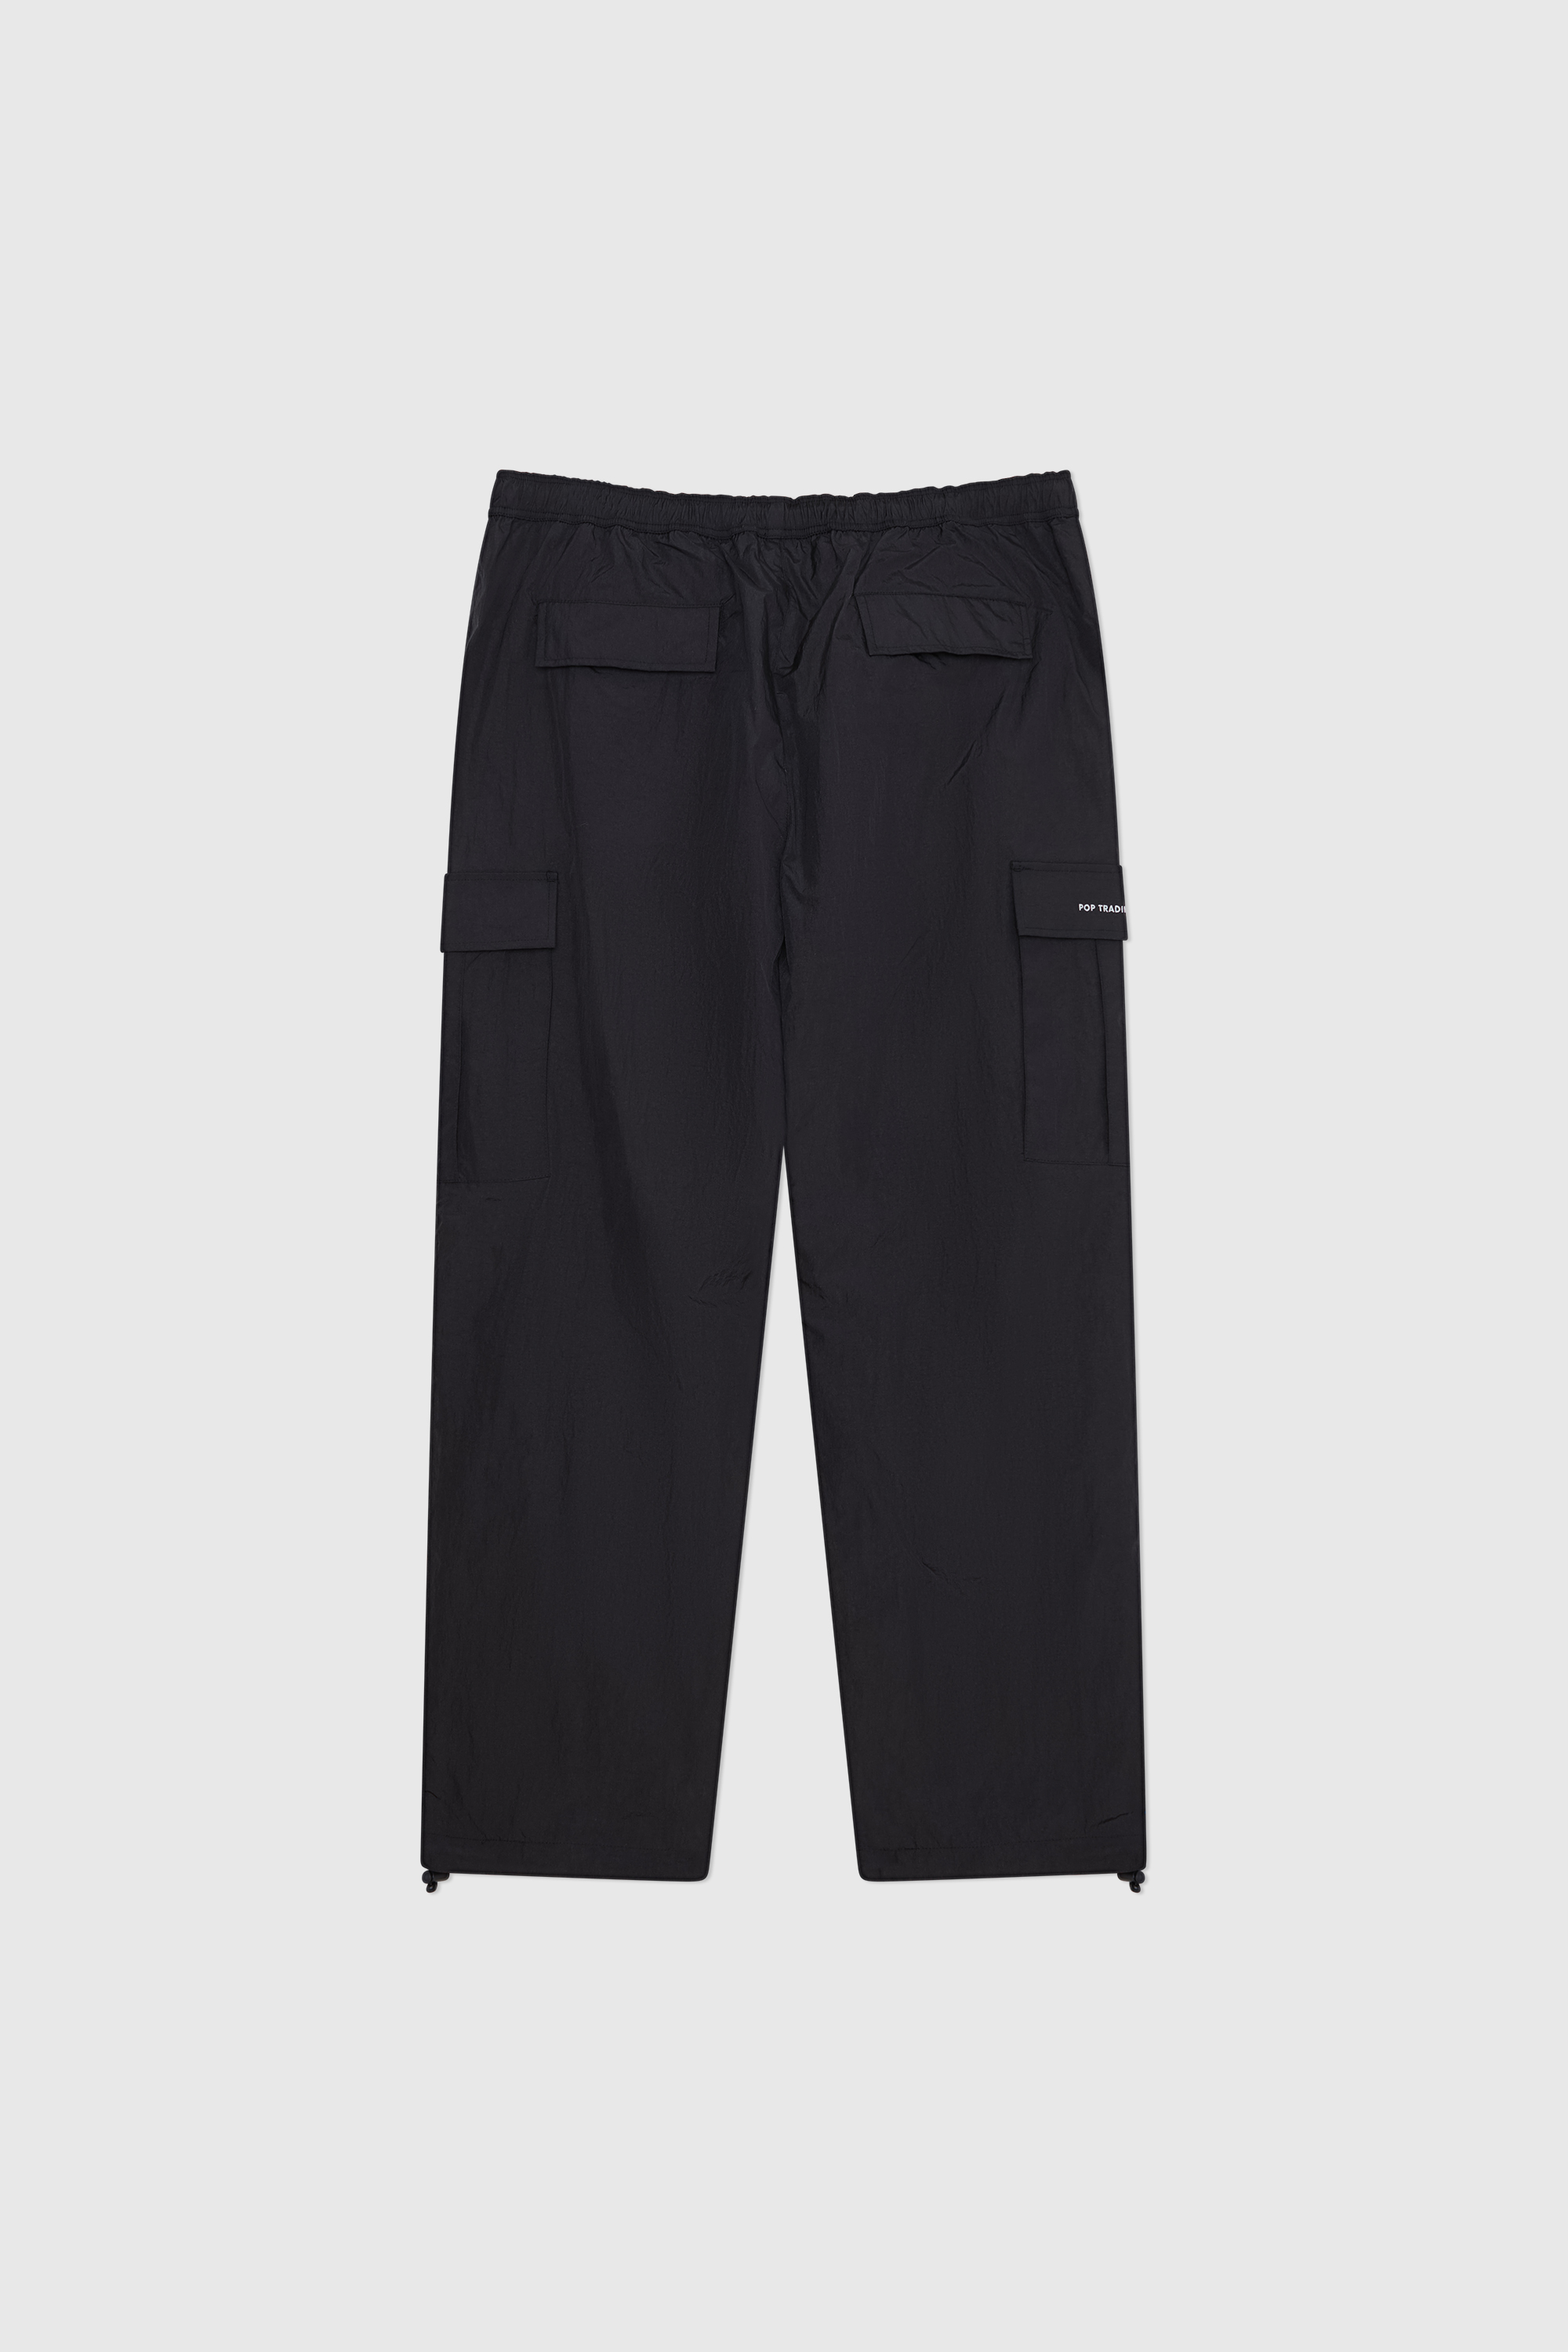 Pop Trading Company Cargo Track Pant Anthracite | WoodWood.com